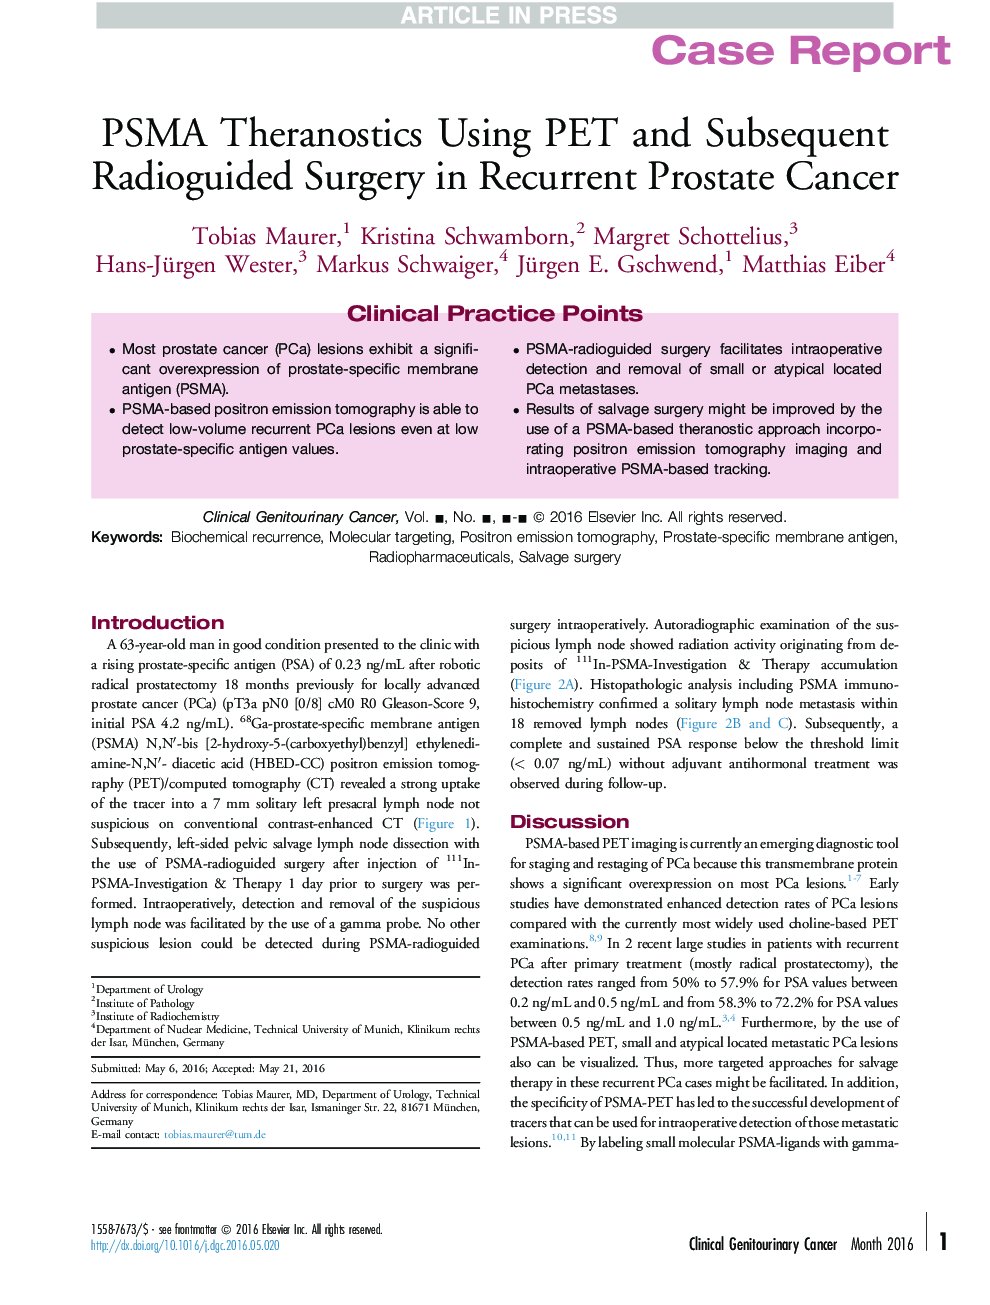 PSMA Theranostics Using PET and Subsequent Radioguided Surgery in Recurrent Prostate Cancer